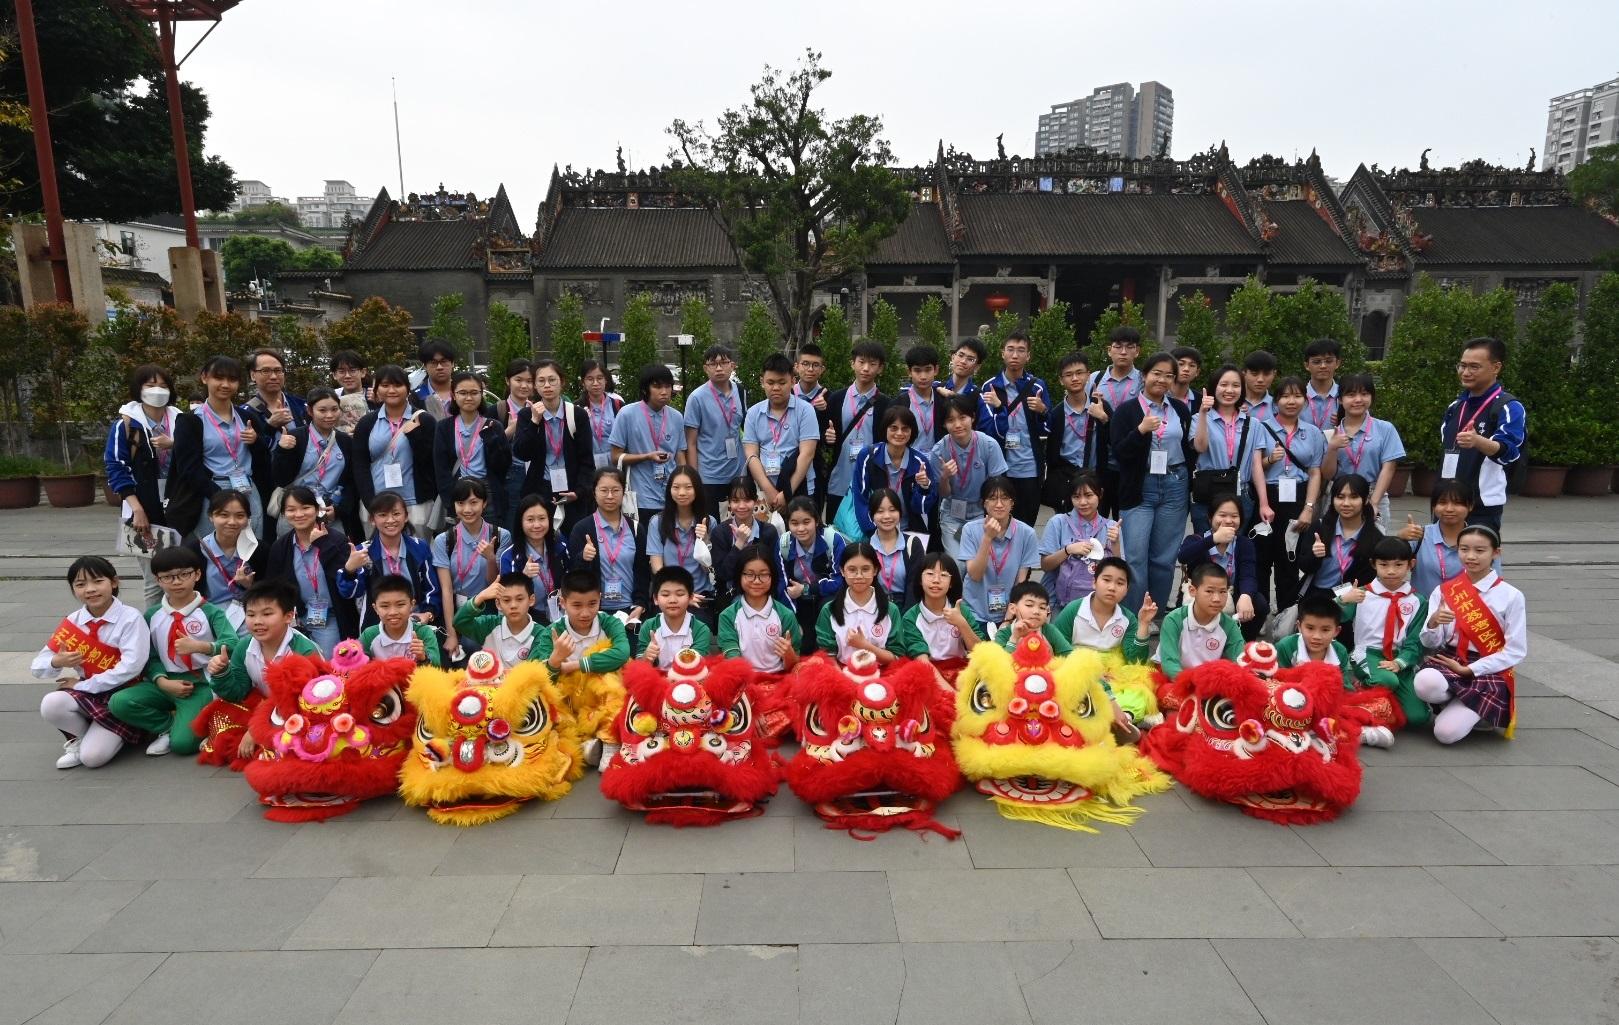 The delegation of the first Mainland study tour for students of the senior secondary subject of Citizenship and Social Development visited Guangzhou today (April 3), including touring the intangible cultural heritage at Chen Clan Temple. Photo shows members of the delegation with local student performers of a lion dance show.